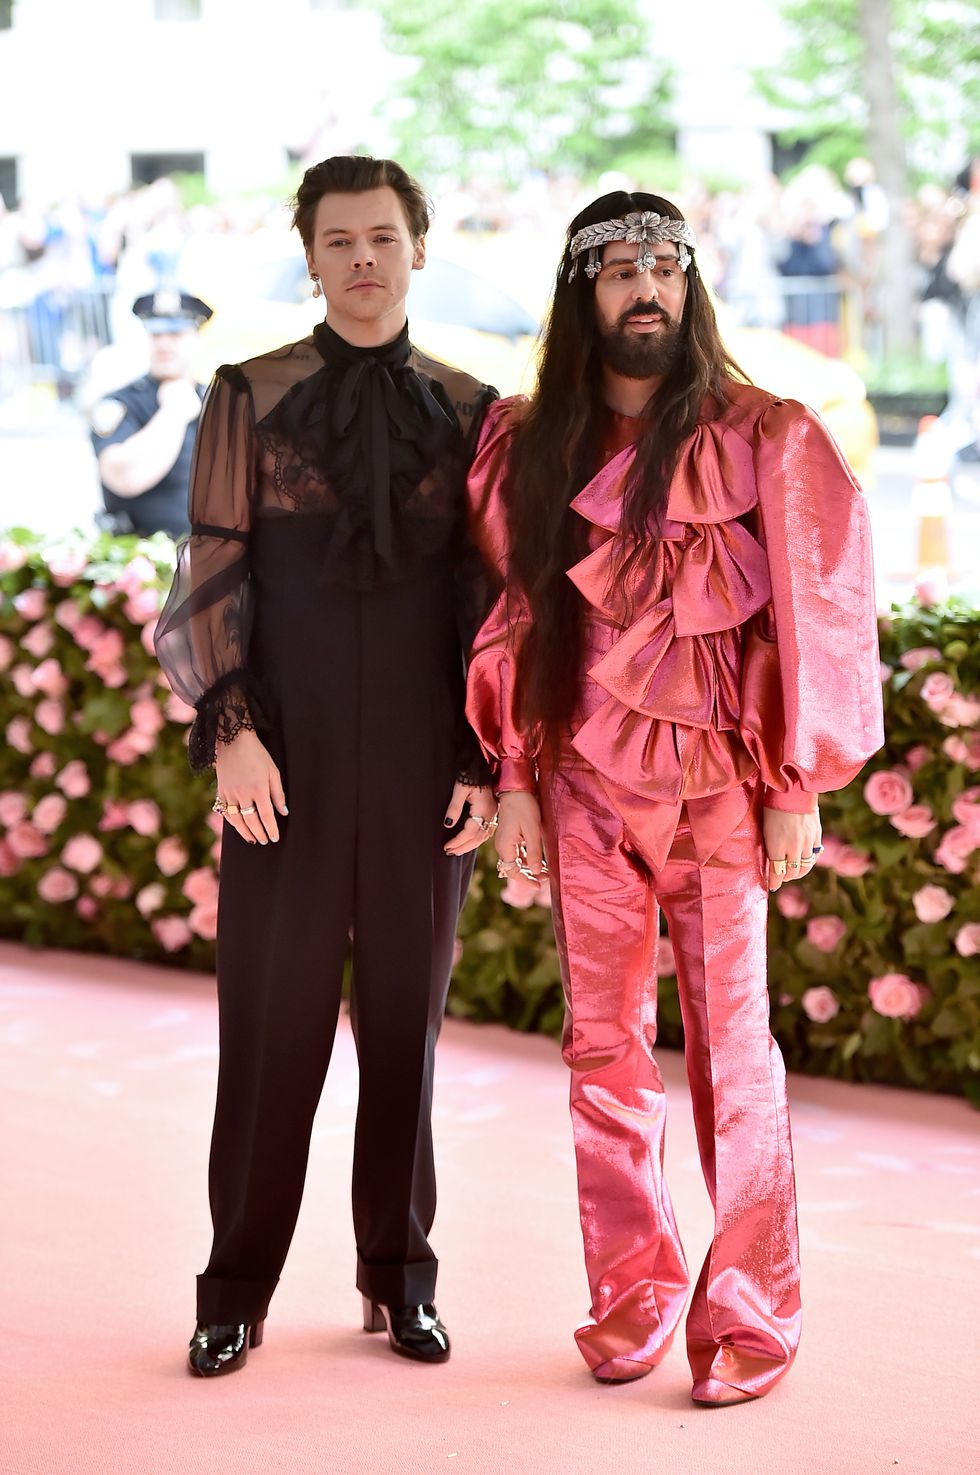 new york, new york   may 06 harry styles and alessandro michele attend the 2019 met gala celebrating camp notes on fashion at metropolitan museum of art on may 06, 2019 in new york city photo by theo wargowireimage